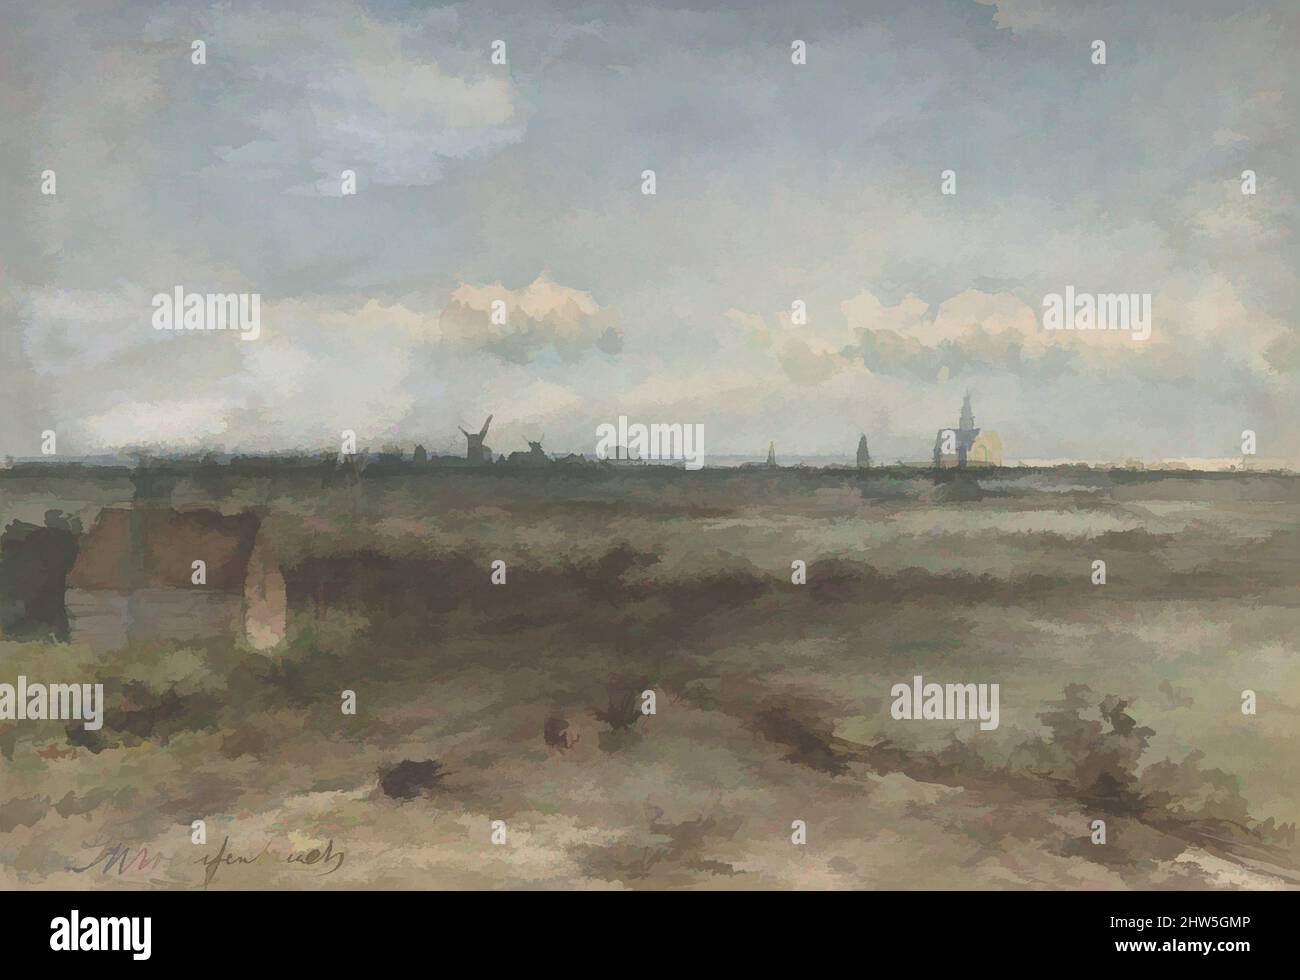 Art inspired by View of Haarlem from the Dunes, mid-19th–early 20th century, Watercolour on paper, sheet: 8 15/16 x 13 in. (22.7 x 33 cm), Drawings, Jan Hendrik Weissenbruch (Dutch, The Hague 1824–1903 The Hague, Classic works modernized by Artotop with a splash of modernity. Shapes, color and value, eye-catching visual impact on art. Emotions through freedom of artworks in a contemporary way. A timeless message pursuing a wildly creative new direction. Artists turning to the digital medium and creating the Artotop NFT Stock Photo